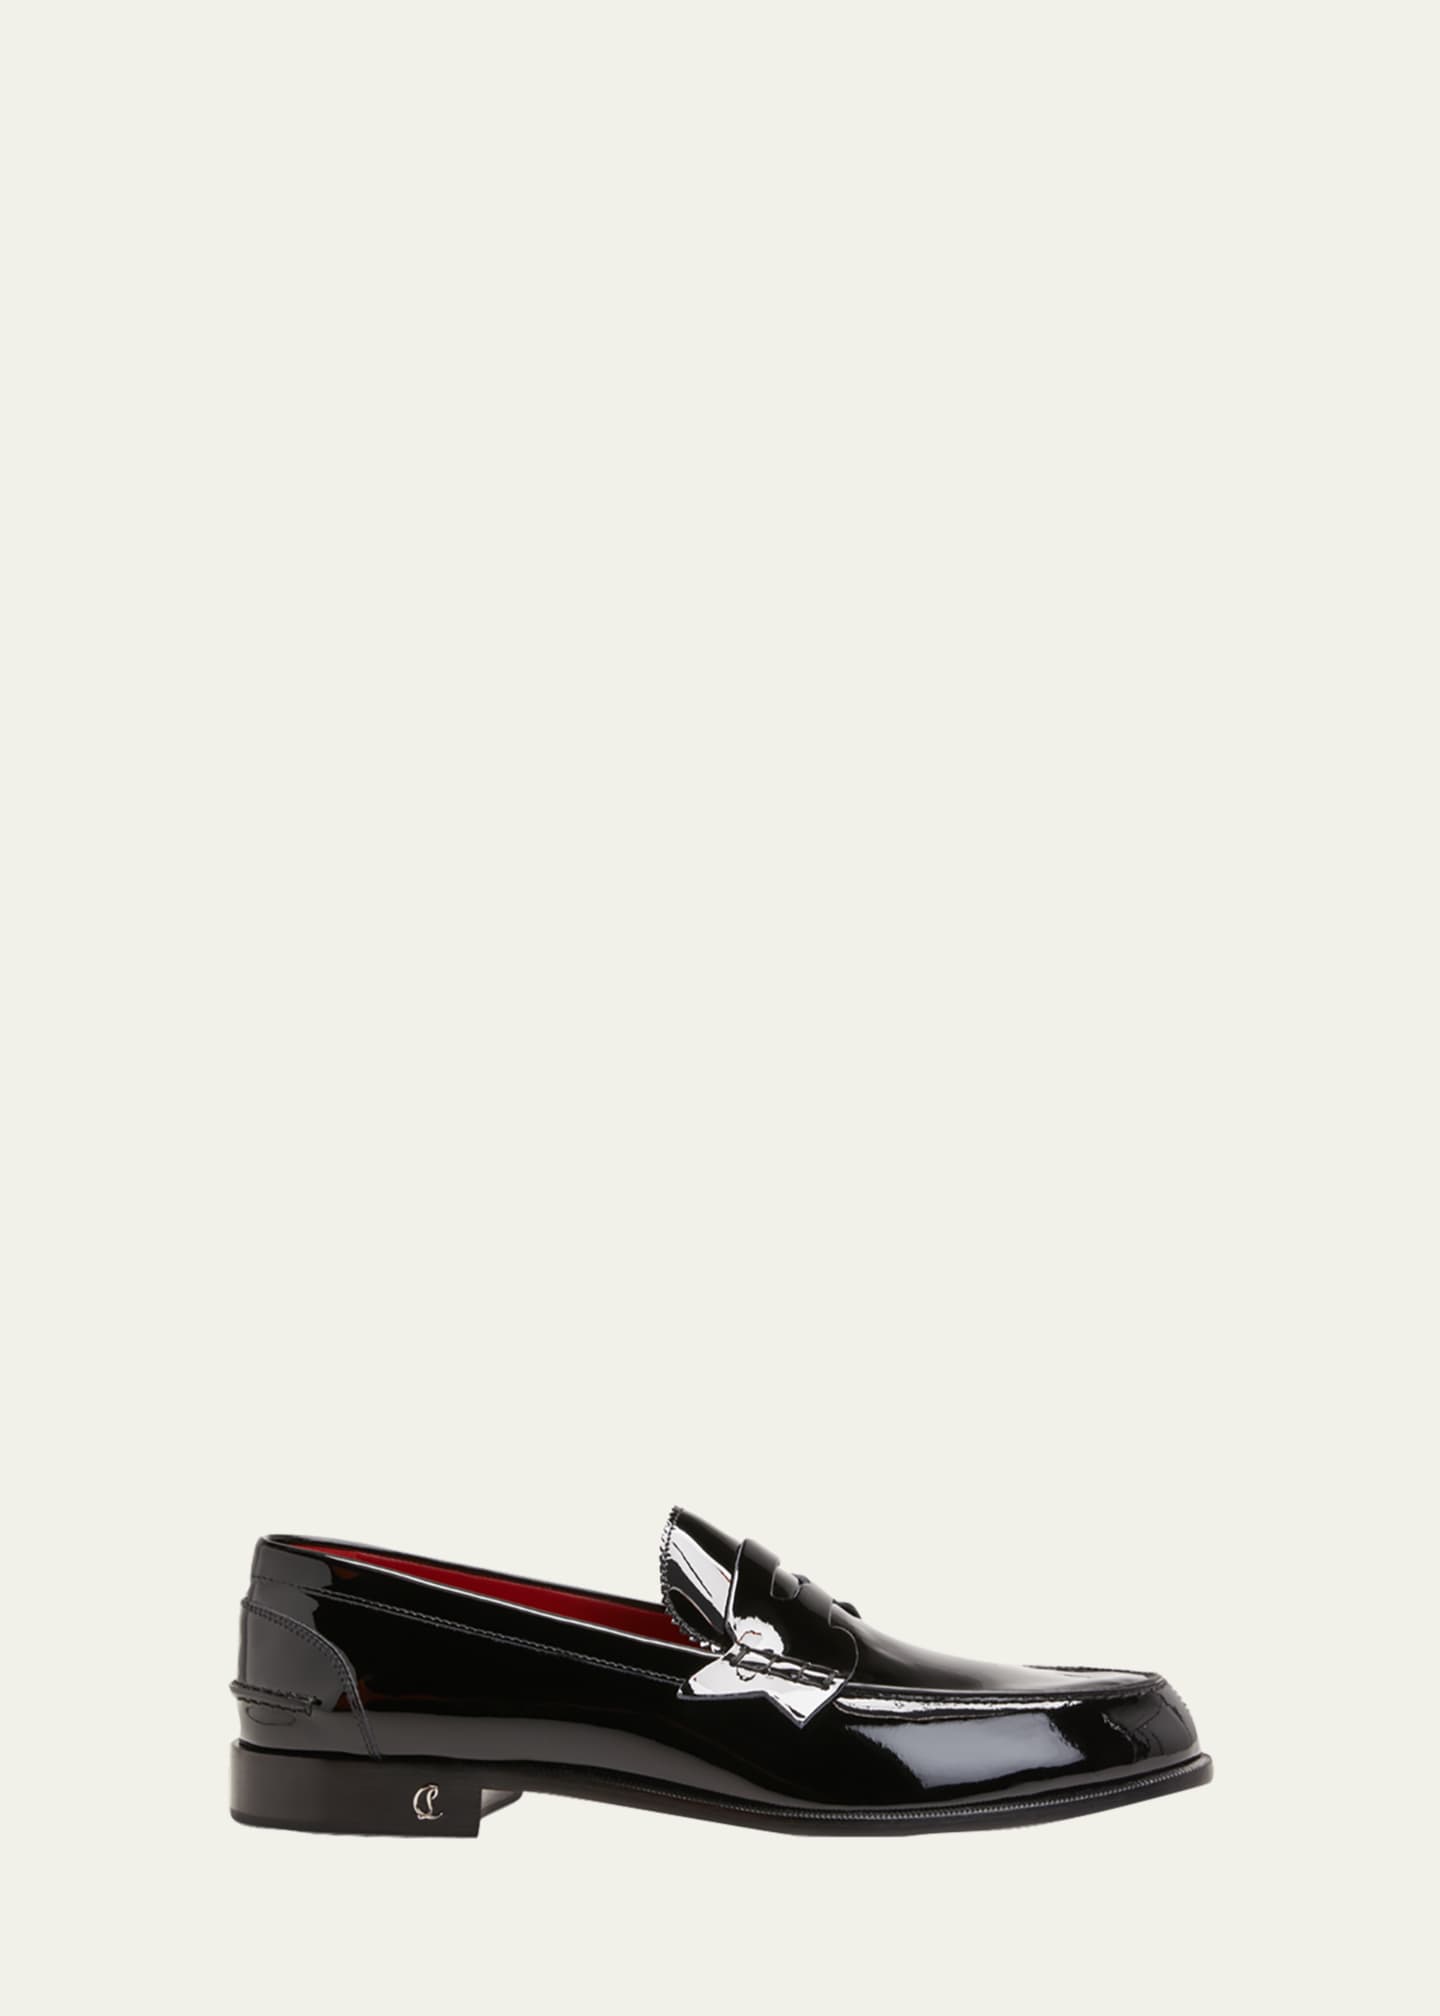 Christian Louboutin No Penny Leather Loafer in Black for Men